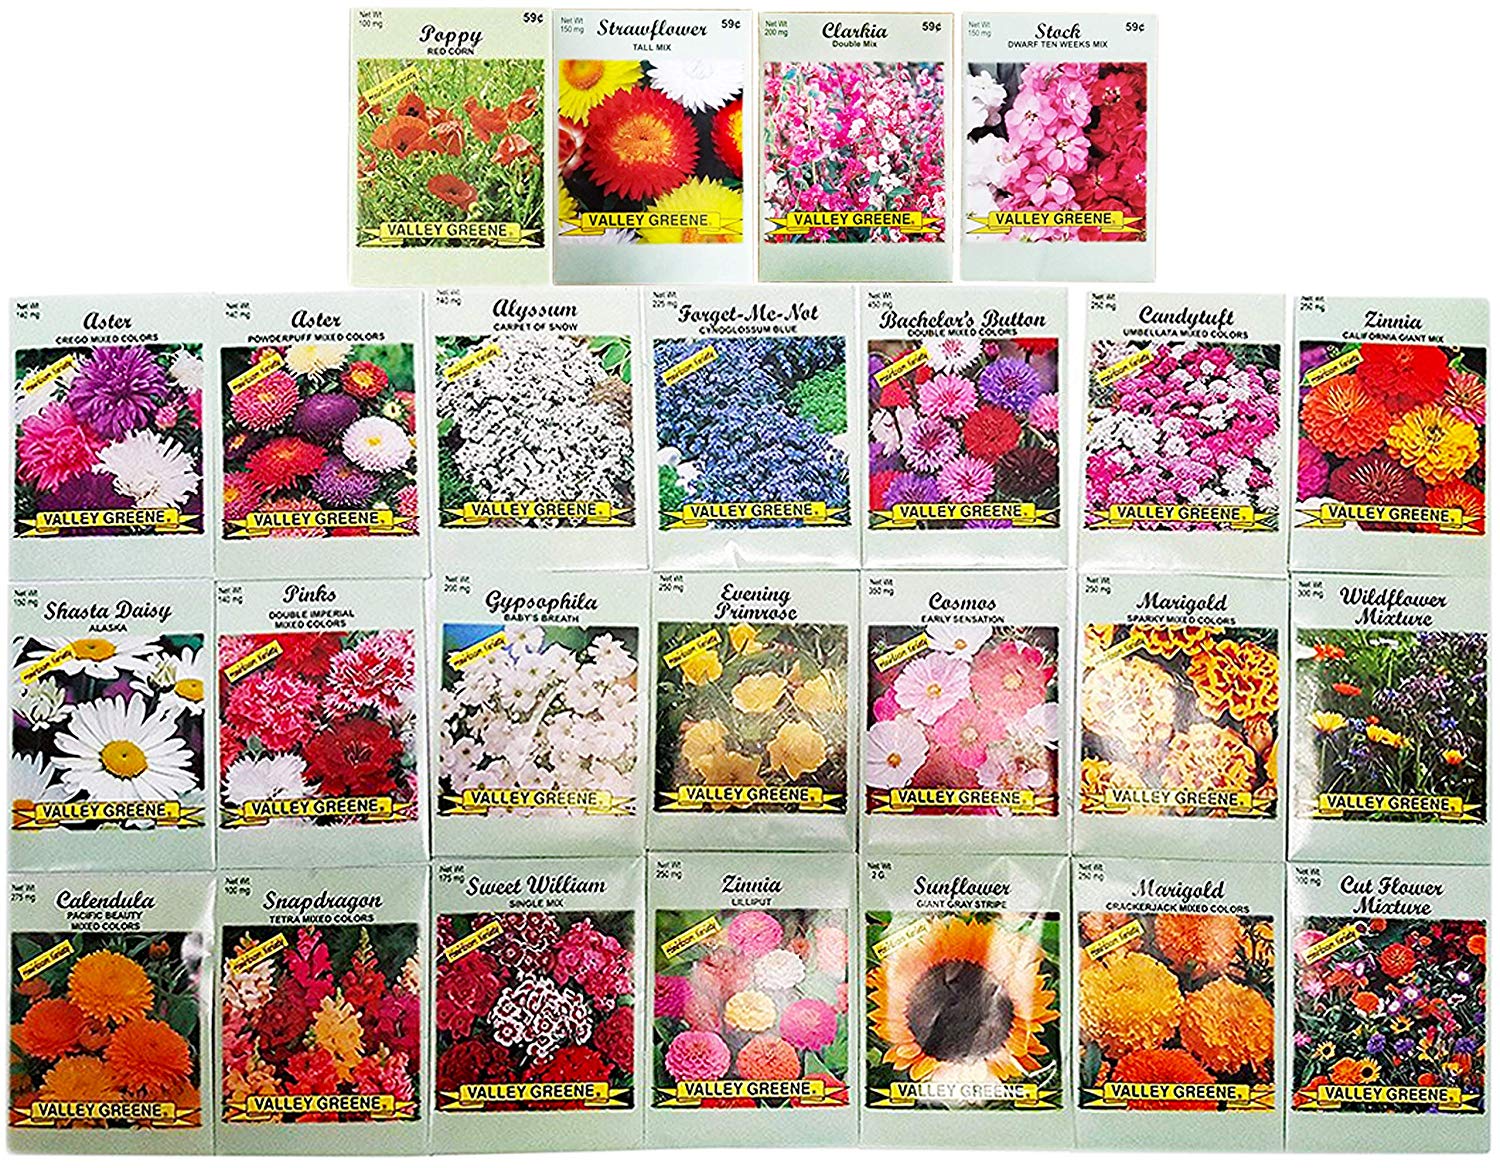 Set of 25 Flower Seed Packets Including 10 or More Varieties Forget Me Nots, Pinks, Marigolds